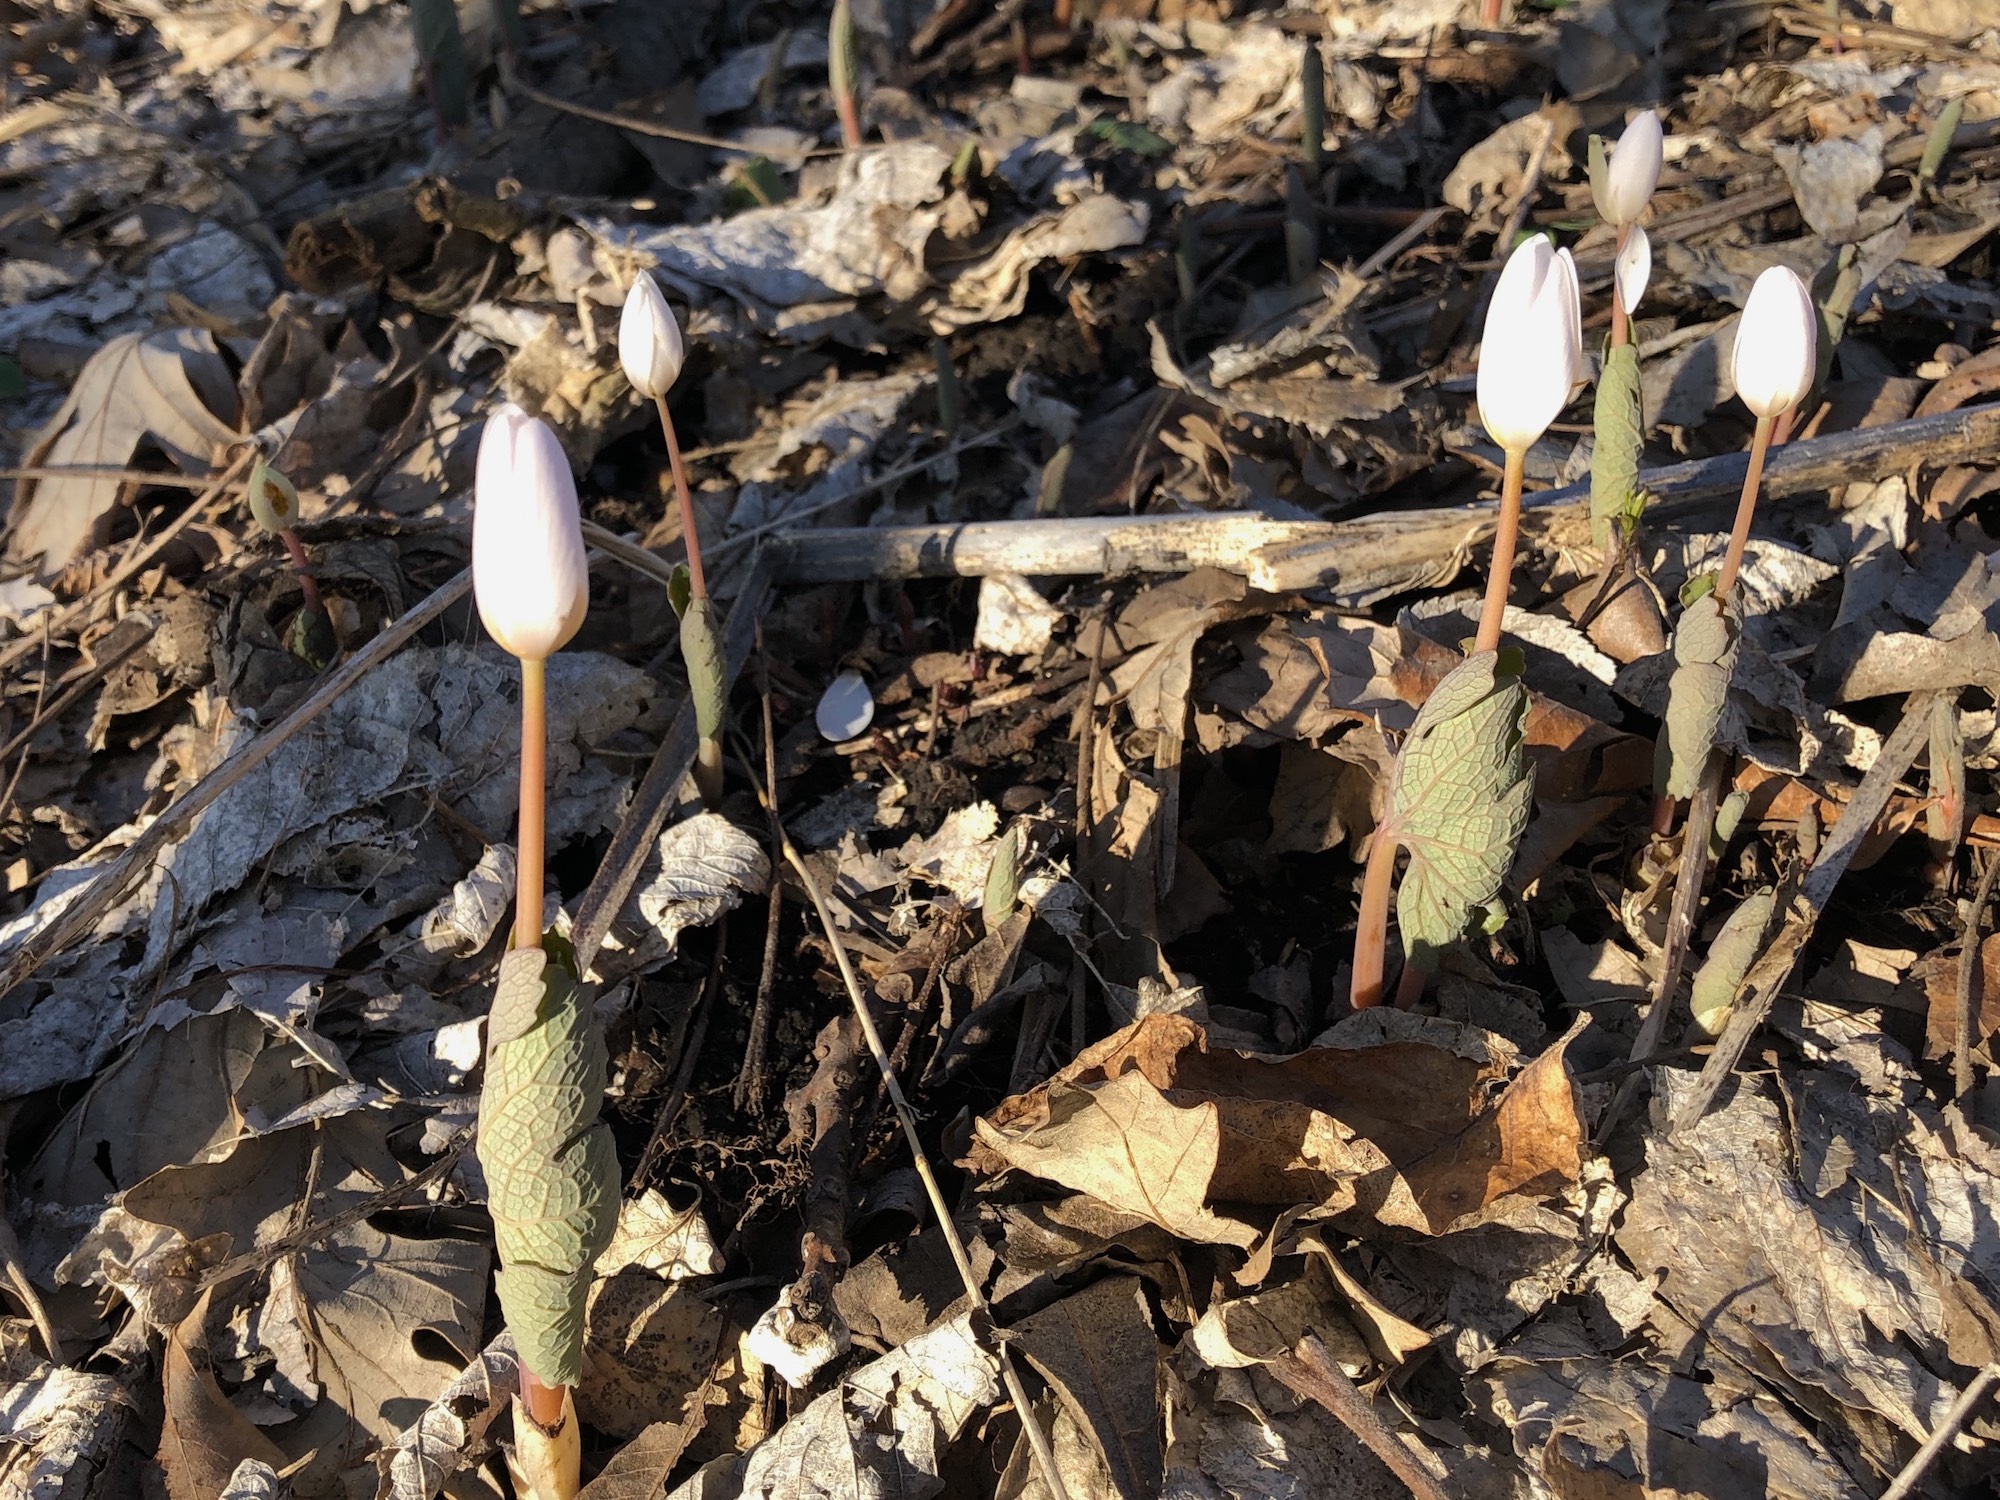 Bloodroot in Oak Savanna by Council Ring in Madison, Wisconsin on April 10, 2020.